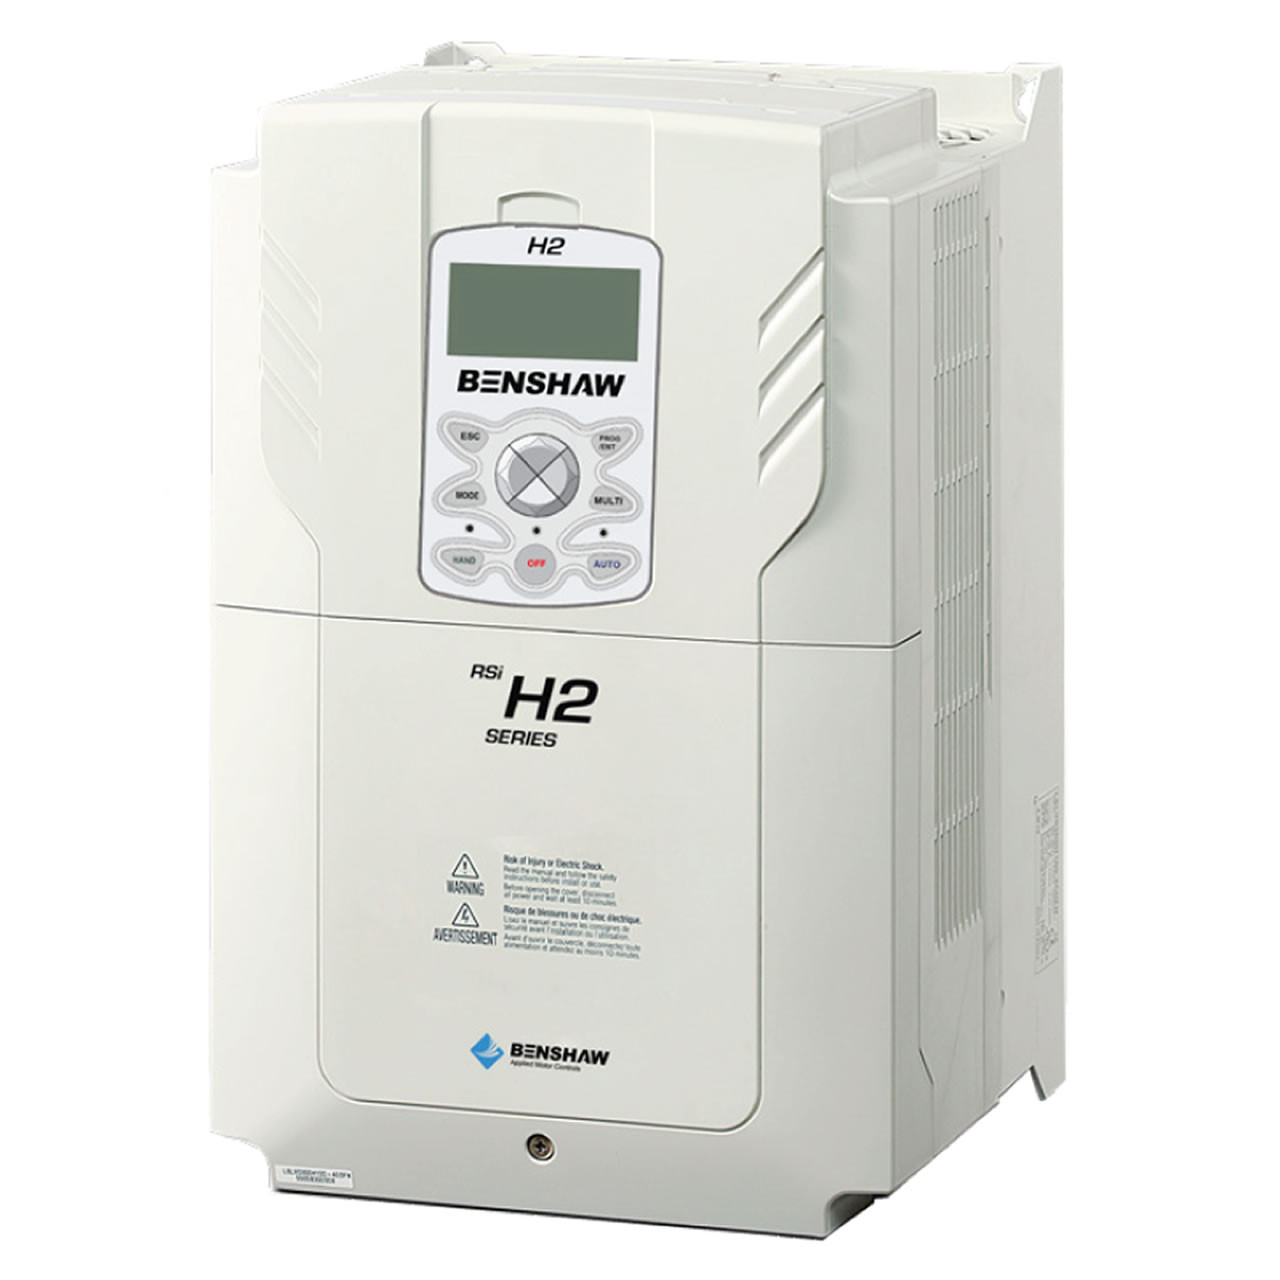 Benshaw RSI-025-H2-4C variable frequency drive